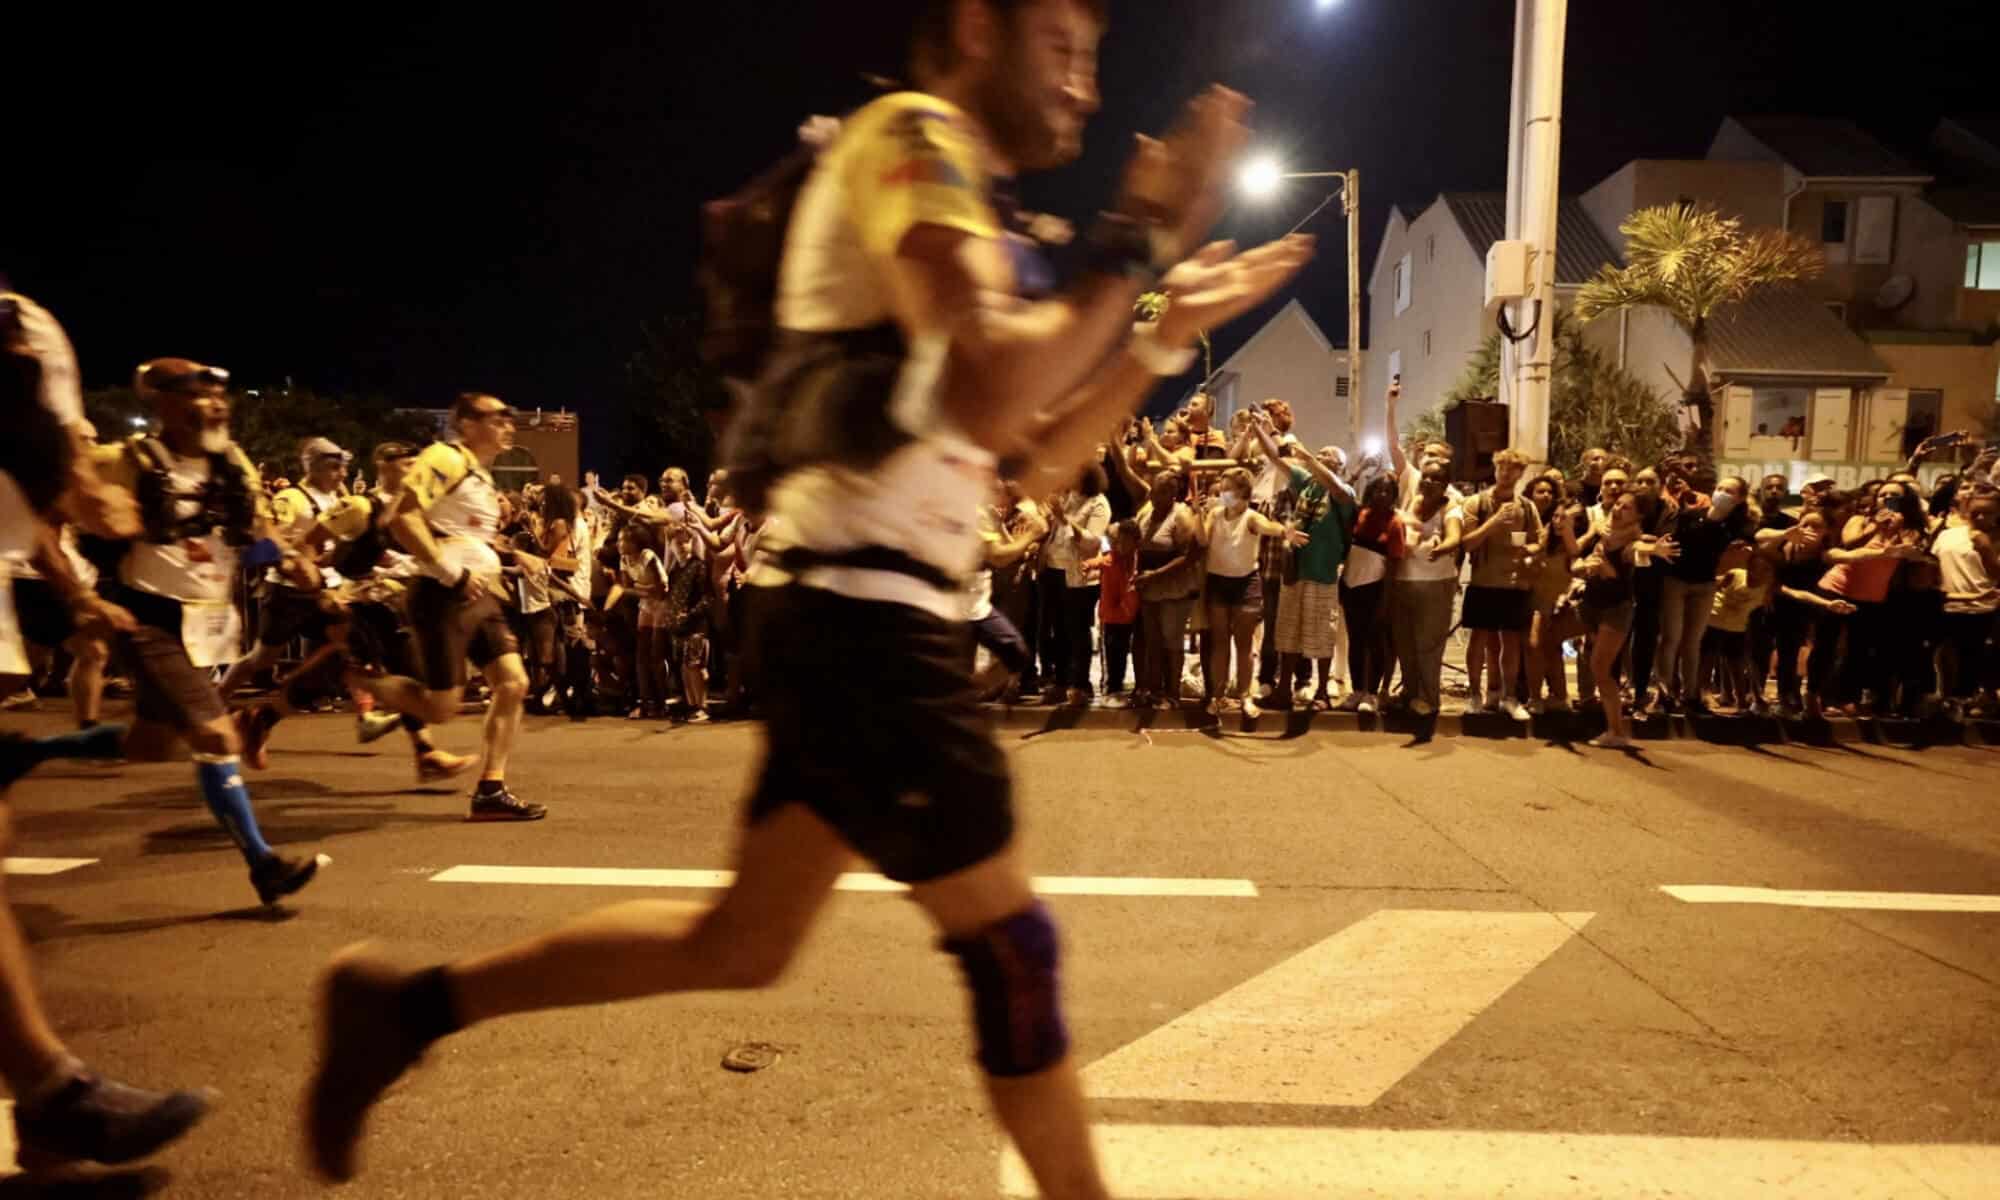 Many runners during a foot race